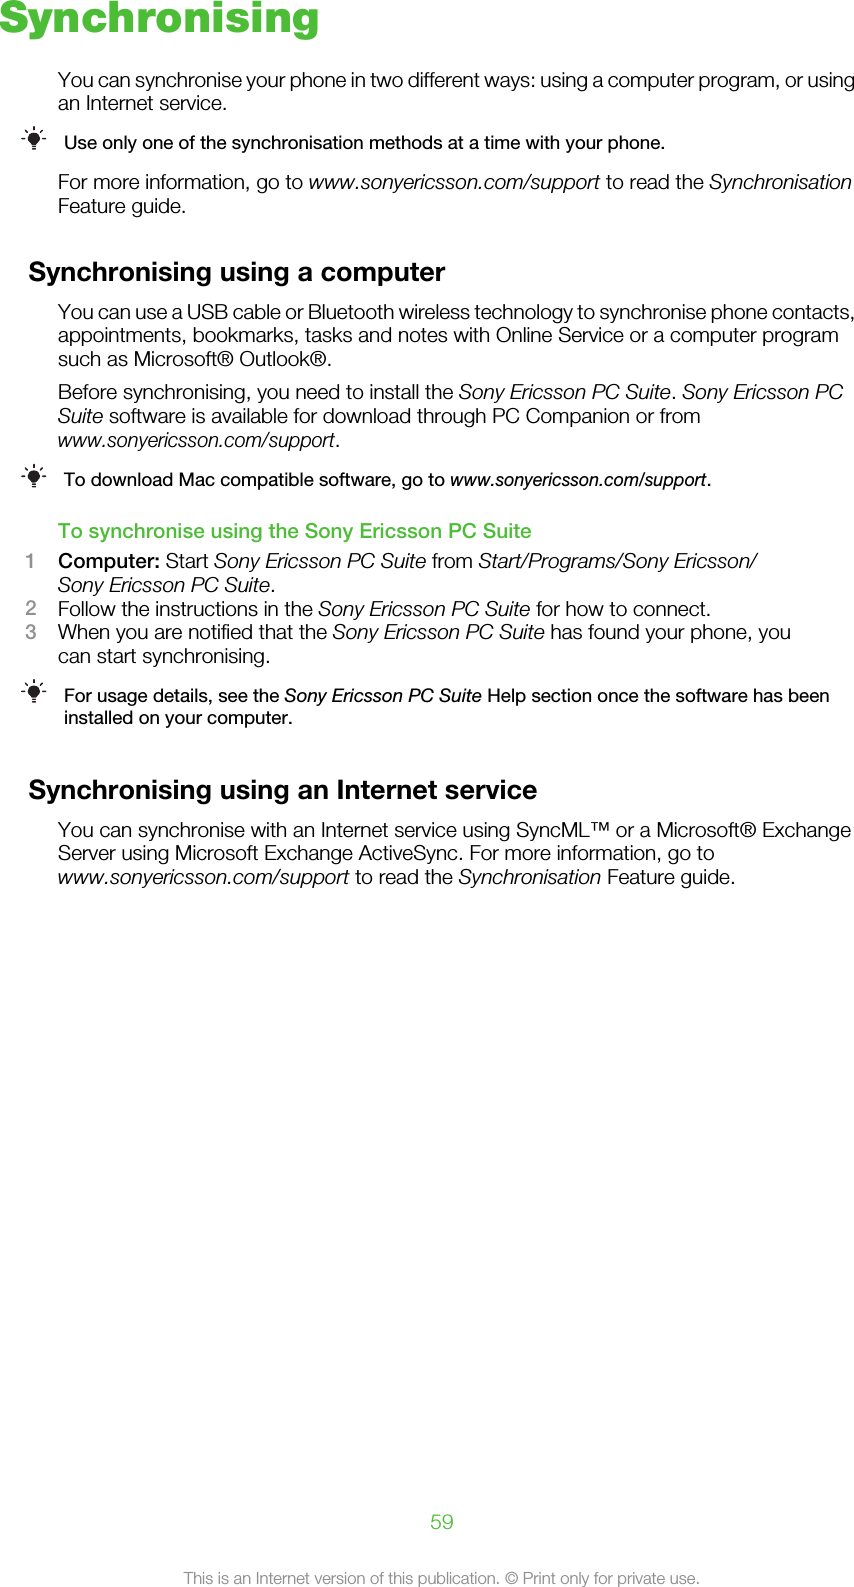 SynchronisingYou can synchronise your phone in two different ways: using a computer program, or usingan Internet service.Use only one of the synchronisation methods at a time with your phone.For more information, go to www.sonyericsson.com/support to read the SynchronisationFeature guide.Synchronising using a computerYou can use a USB cable or Bluetooth wireless technology to synchronise phone contacts,appointments, bookmarks, tasks and notes with Online Service or a computer programsuch as Microsoft® Outlook®.Before synchronising, you need to install the Sony Ericsson PC Suite. Sony Ericsson PCSuite software is available for download through PC Companion or fromwww.sonyericsson.com/support.To download Mac compatible software, go to www.sonyericsson.com/support.To synchronise using the Sony Ericsson PC Suite1Computer: Start Sony Ericsson PC Suite from Start/Programs/Sony Ericsson/Sony Ericsson PC Suite.2Follow the instructions in the Sony Ericsson PC Suite for how to connect.3When you are notified that the Sony Ericsson PC Suite has found your phone, youcan start synchronising.For usage details, see the Sony Ericsson PC Suite Help section once the software has beeninstalled on your computer.Synchronising using an Internet serviceYou can synchronise with an Internet service using SyncML™ or a Microsoft® ExchangeServer using Microsoft Exchange ActiveSync. For more information, go towww.sonyericsson.com/support to read the Synchronisation Feature guide.59This is an Internet version of this publication. © Print only for private use.